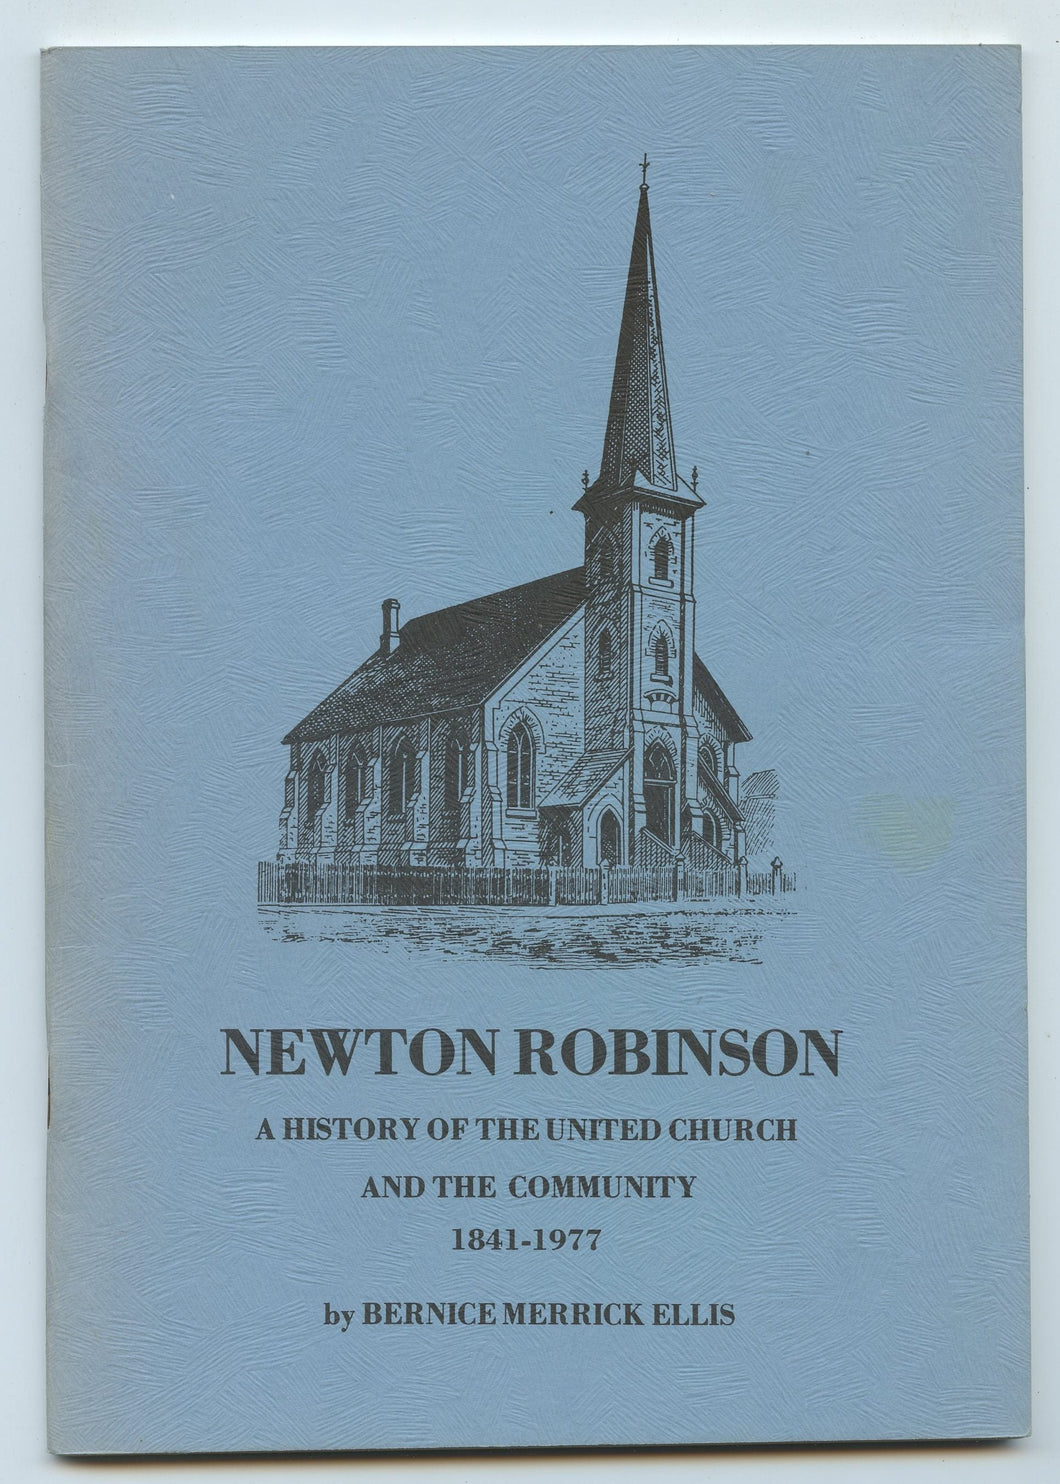 Newton Robinson: A History of the United Church and the Community 1841-1977